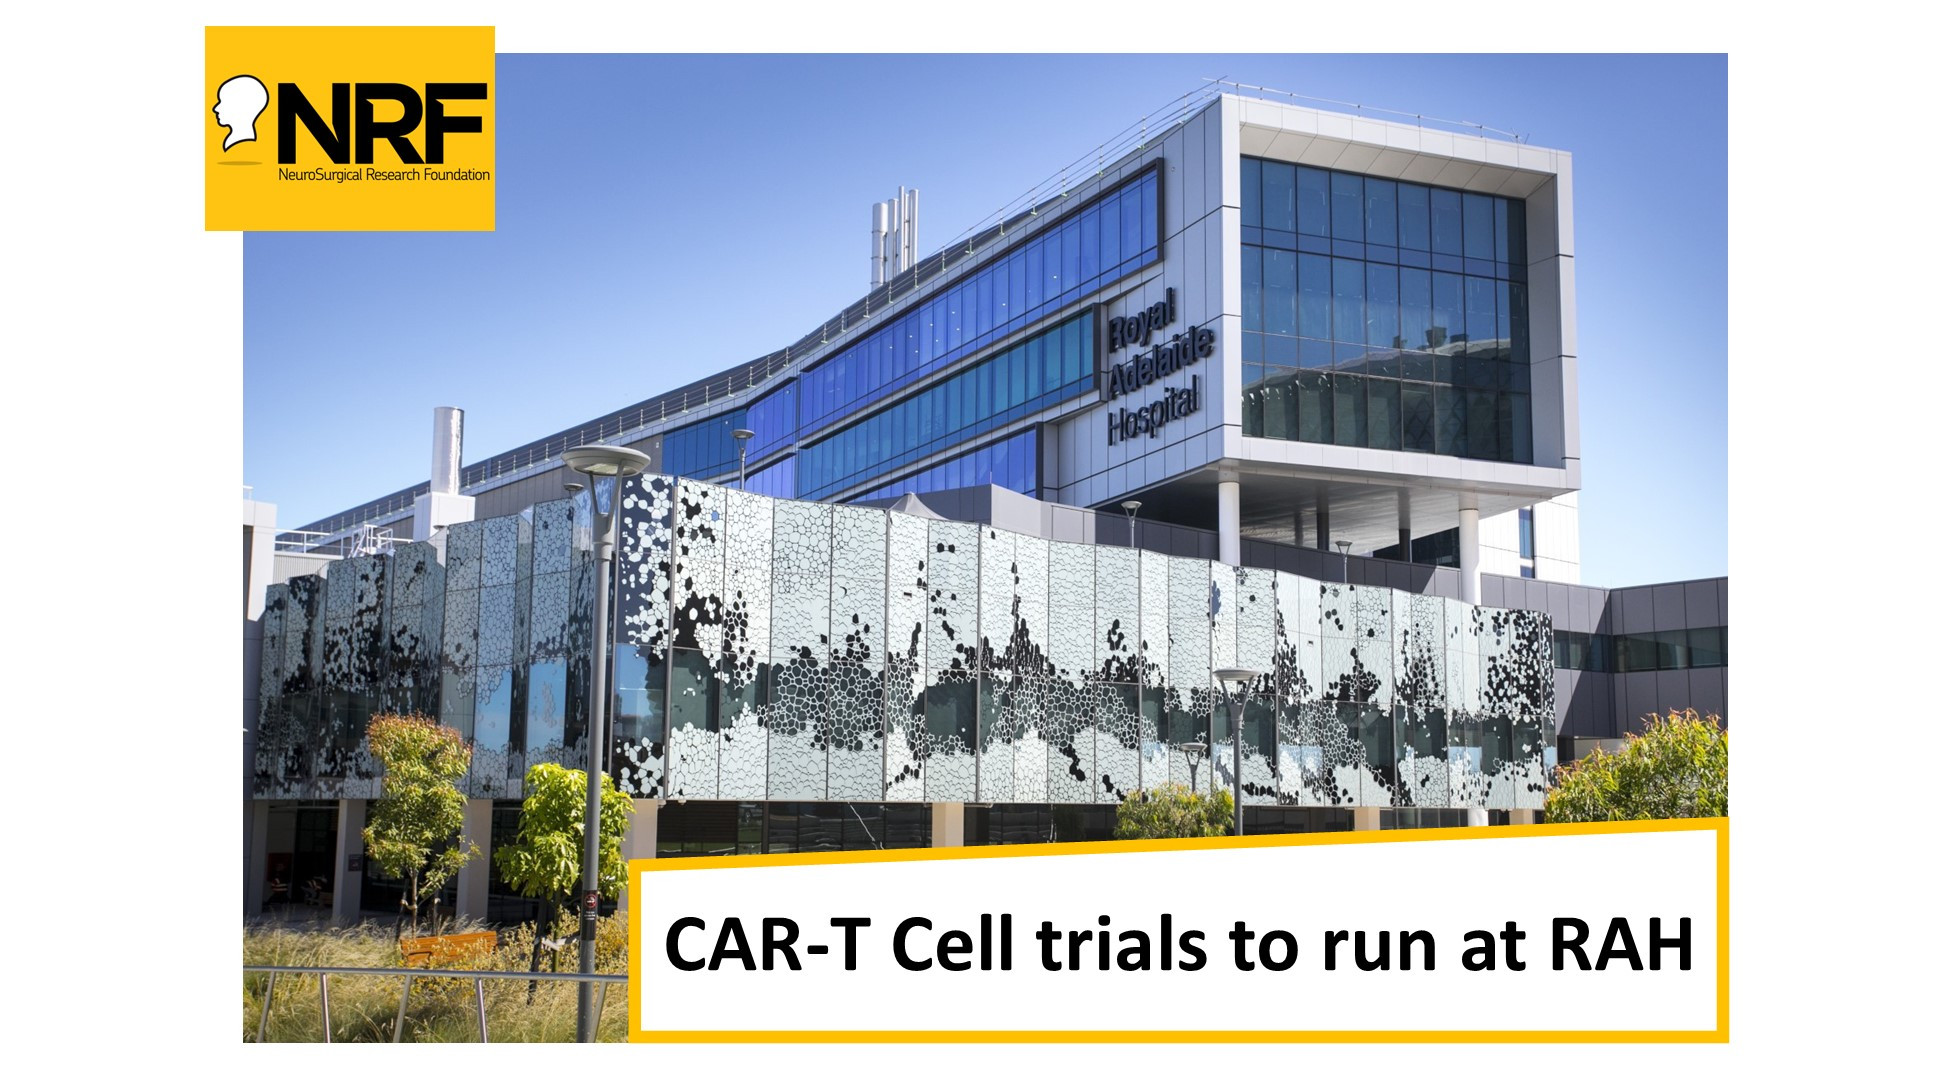 New Immunotherapy CAR-T Cell trials to run at RAH image